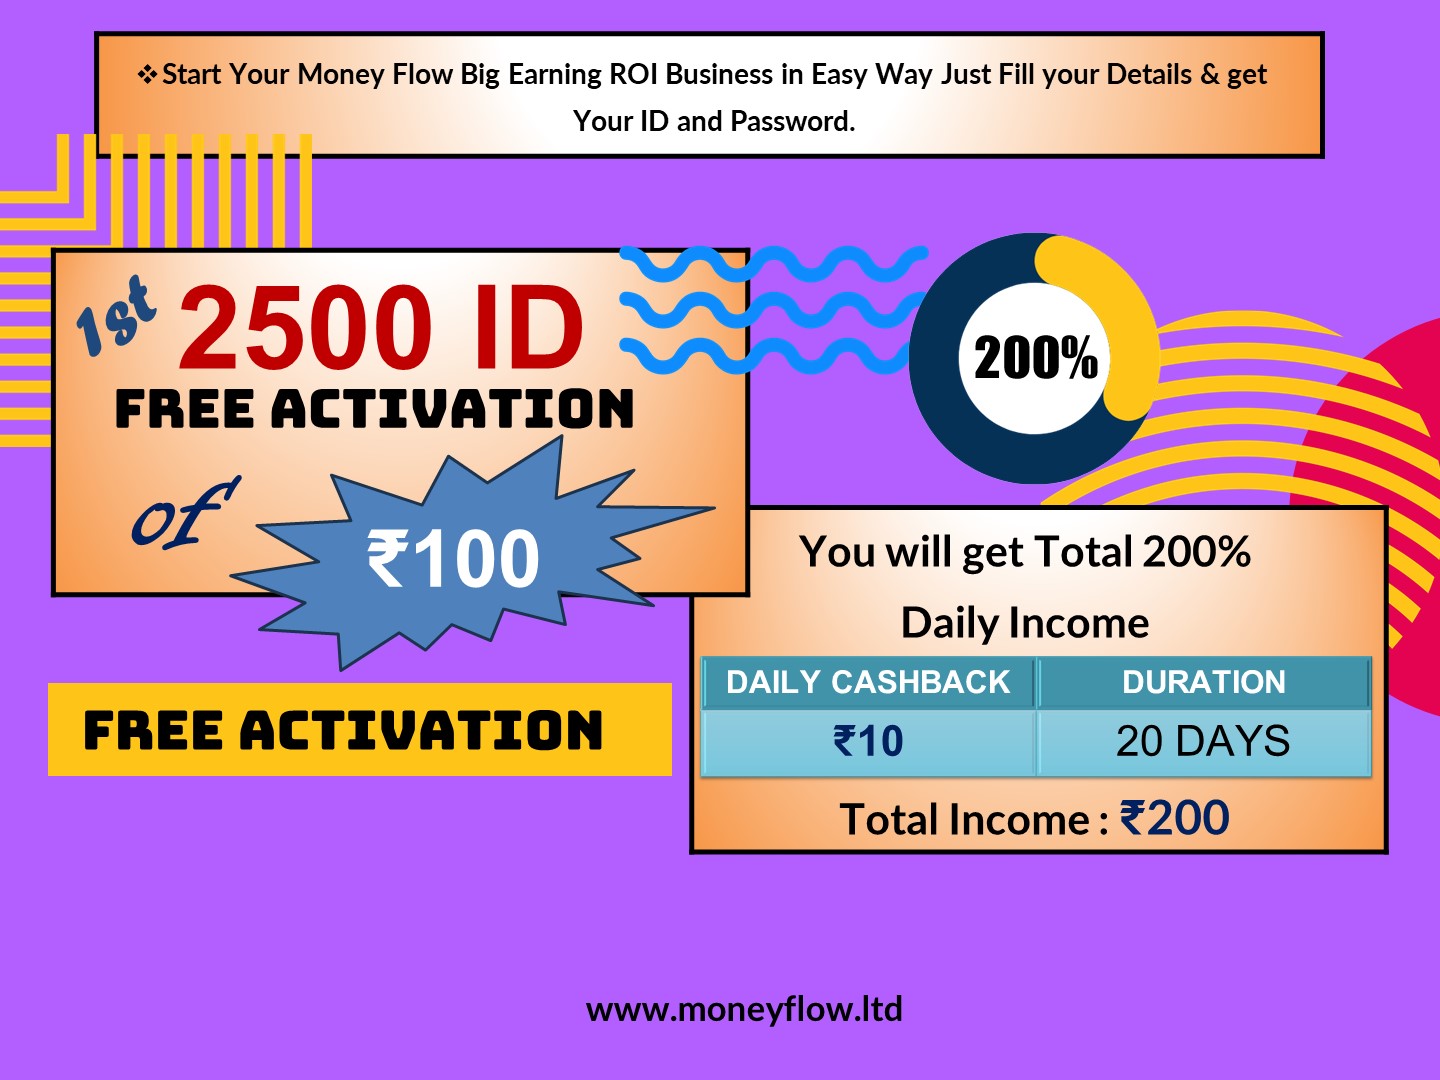 Start Your Money Flow Big Earning ROI Business In Easy Way -1st 2500 ID FREE ACTIVATION